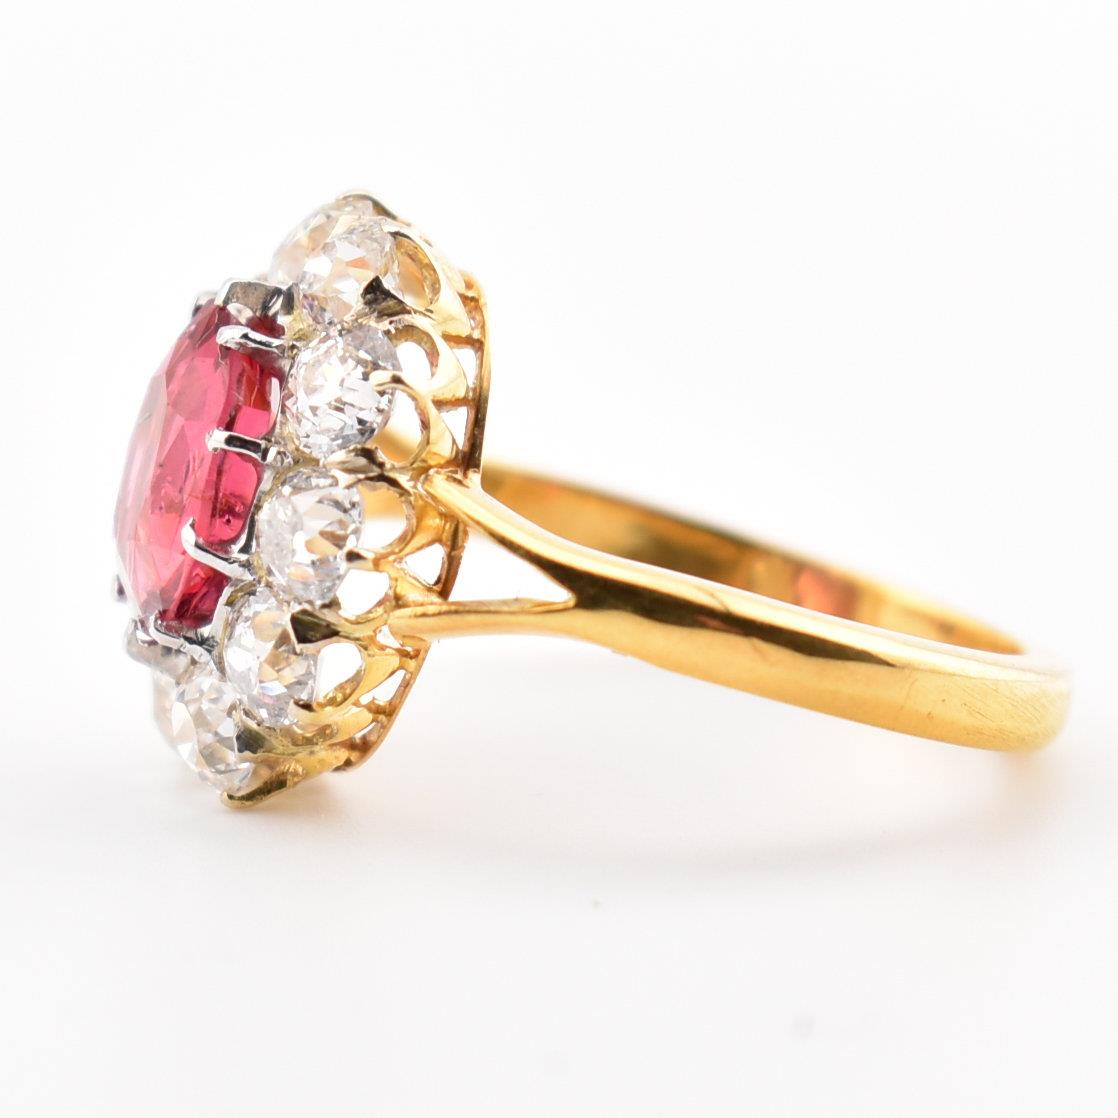 VICTORIAN RED SPINEL & DIAMOND CLUSTER RING - Image 2 of 8